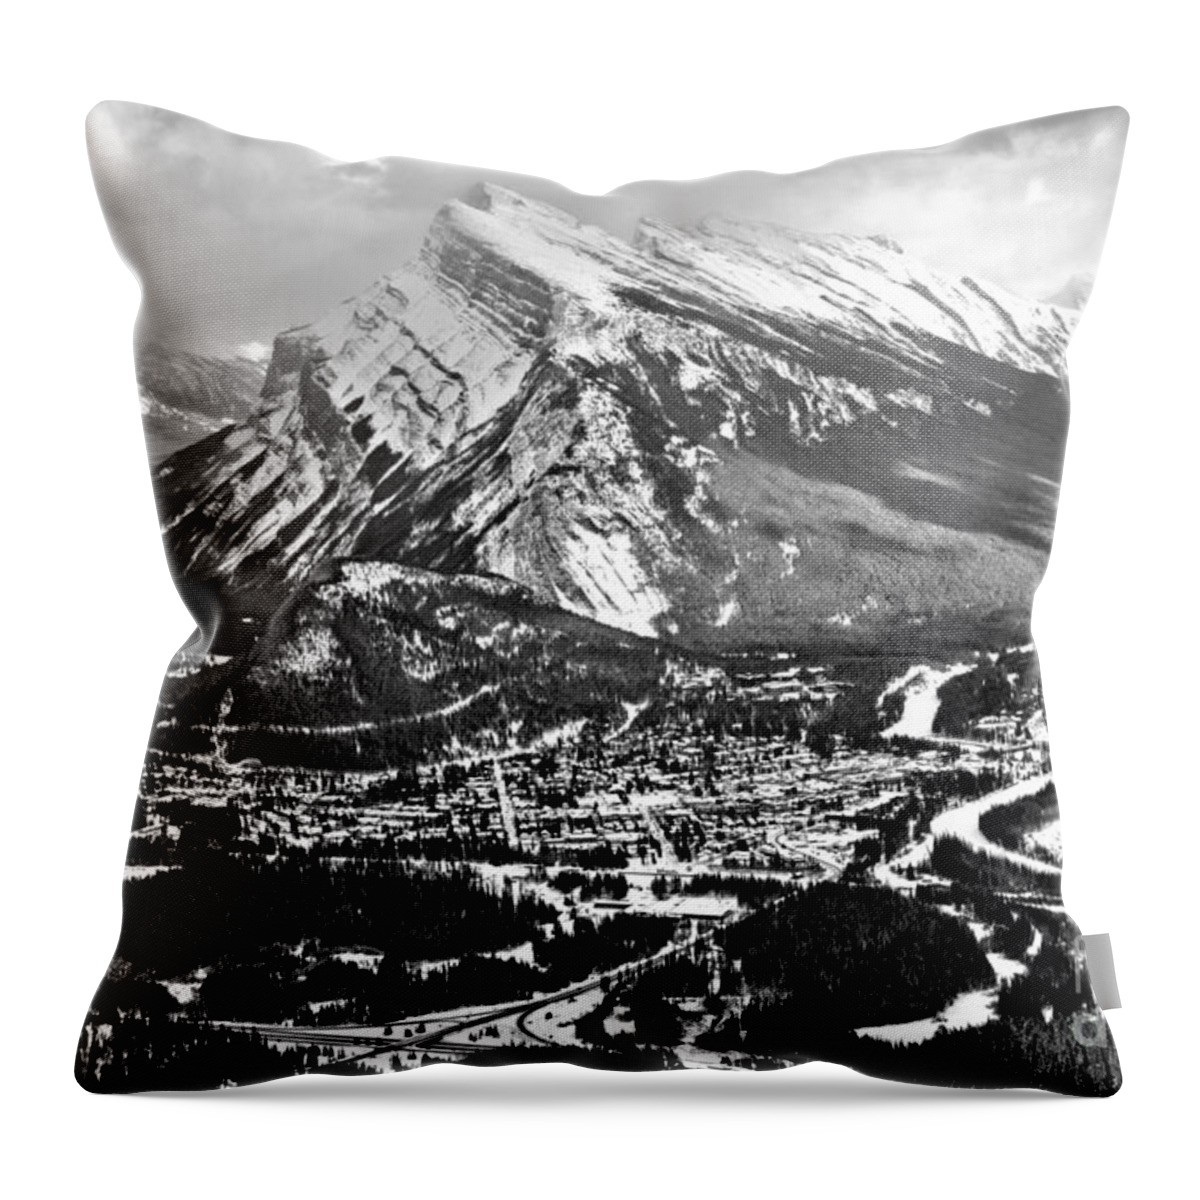 Mt Rundle Throw Pillow featuring the photograph Mt Rundle Aerial View Black And White by Adam Jewell